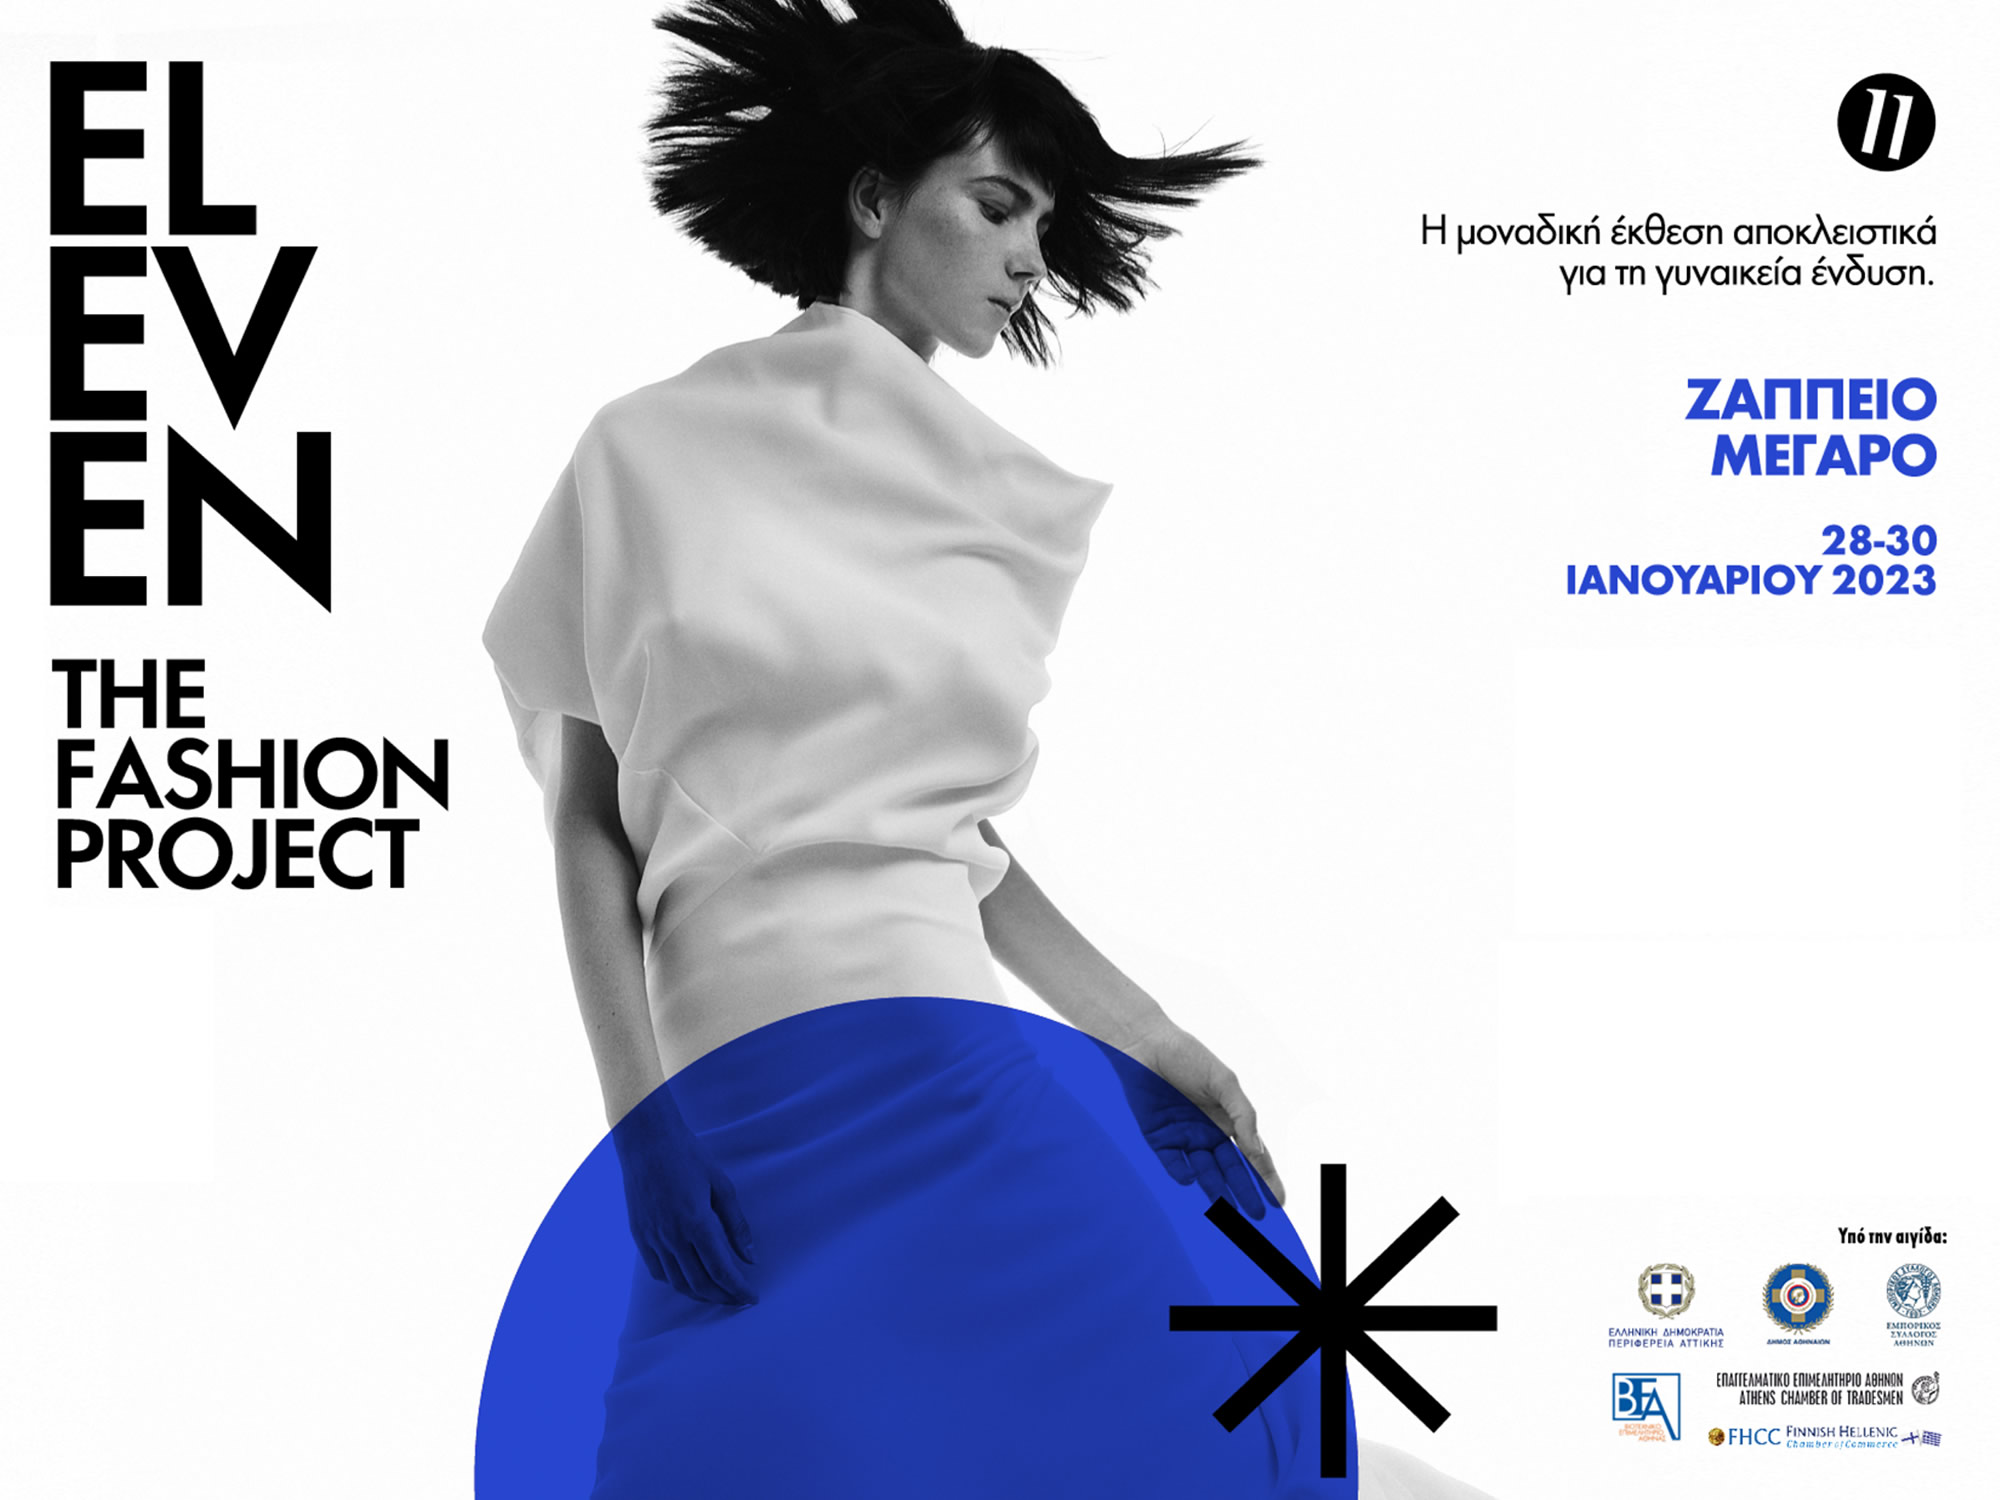 3rd Eleven the Fashion Project exhibition of women’s clothing: January 28-30, 2023 